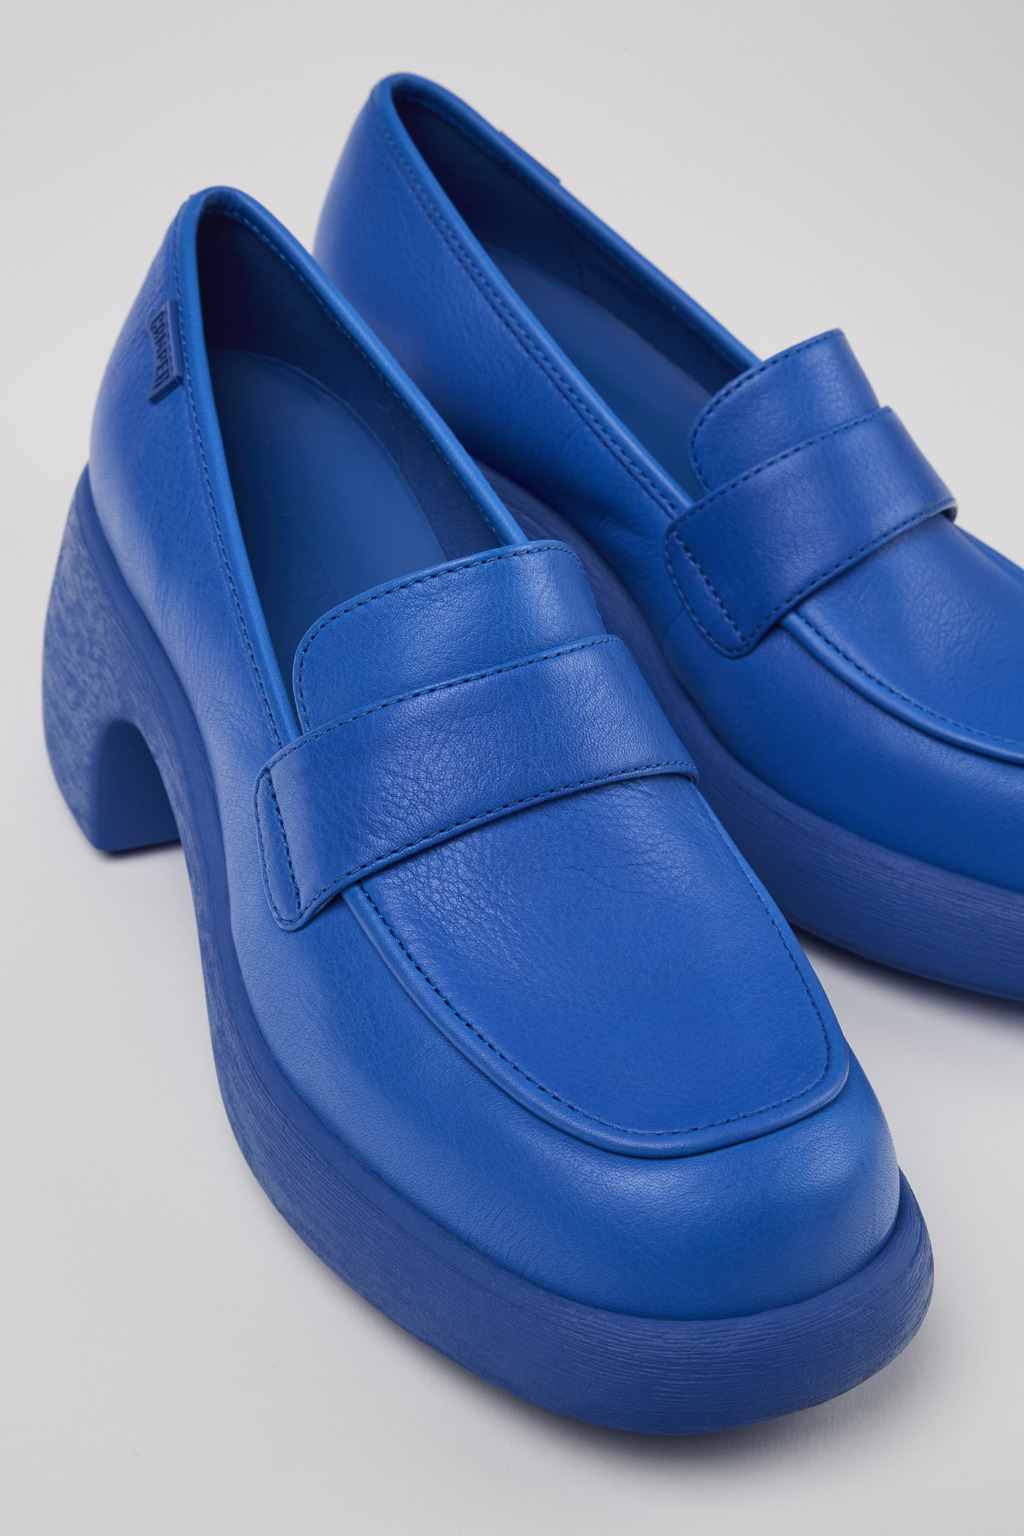 Thelma Blue Loafers for Women - Fall/Winter collection - Camper 